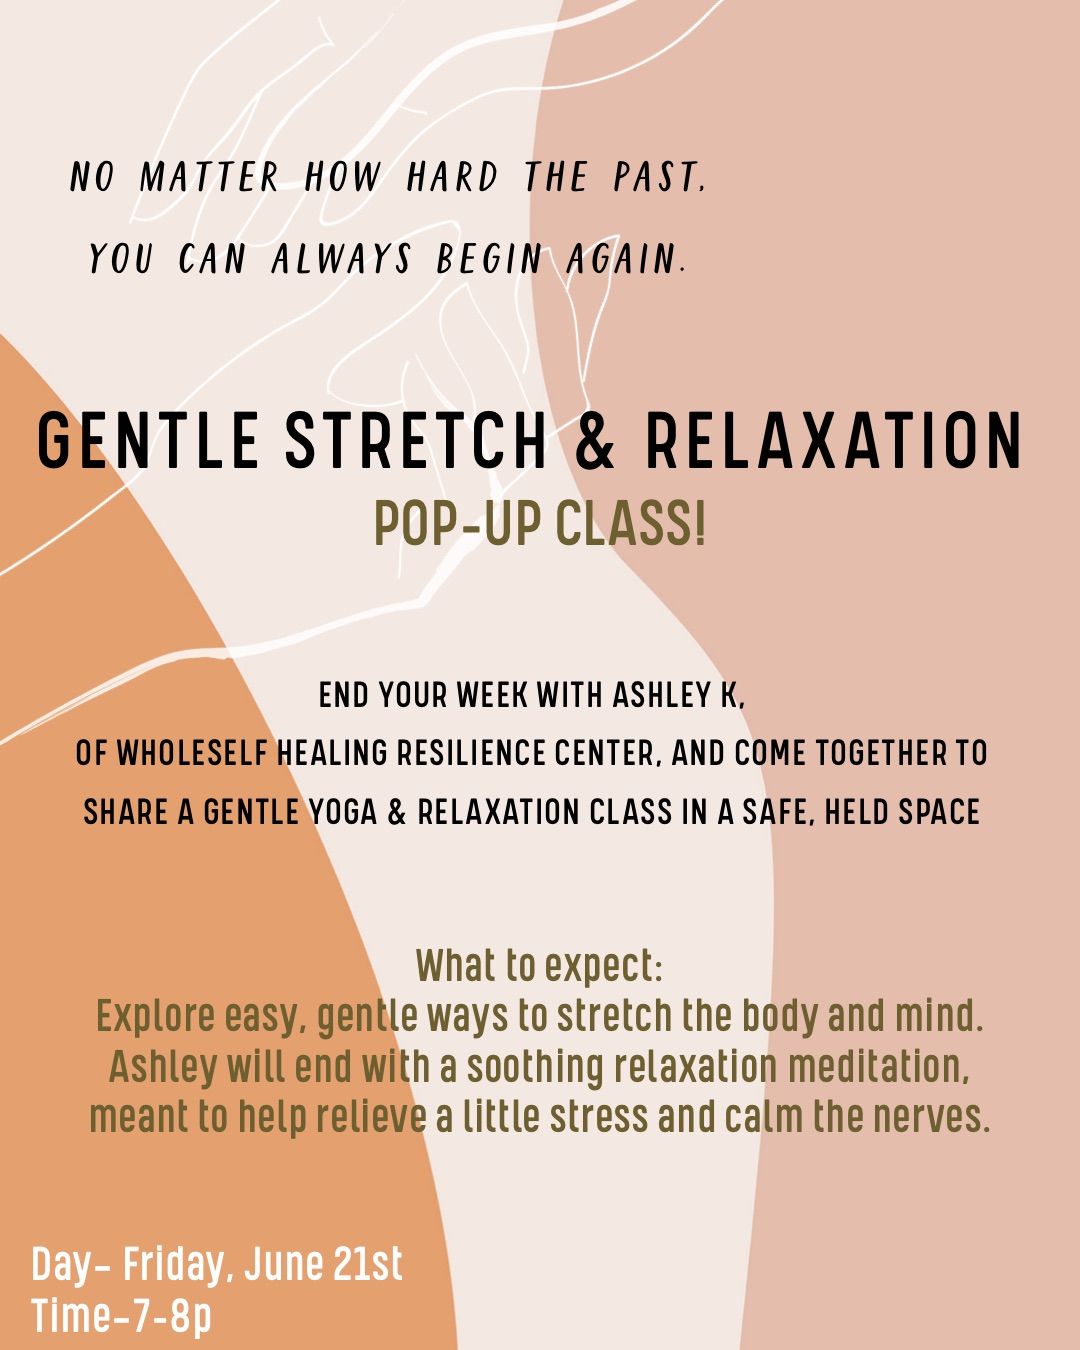 POP-UP GENTLE YOGA & RELAXATION CLASS!